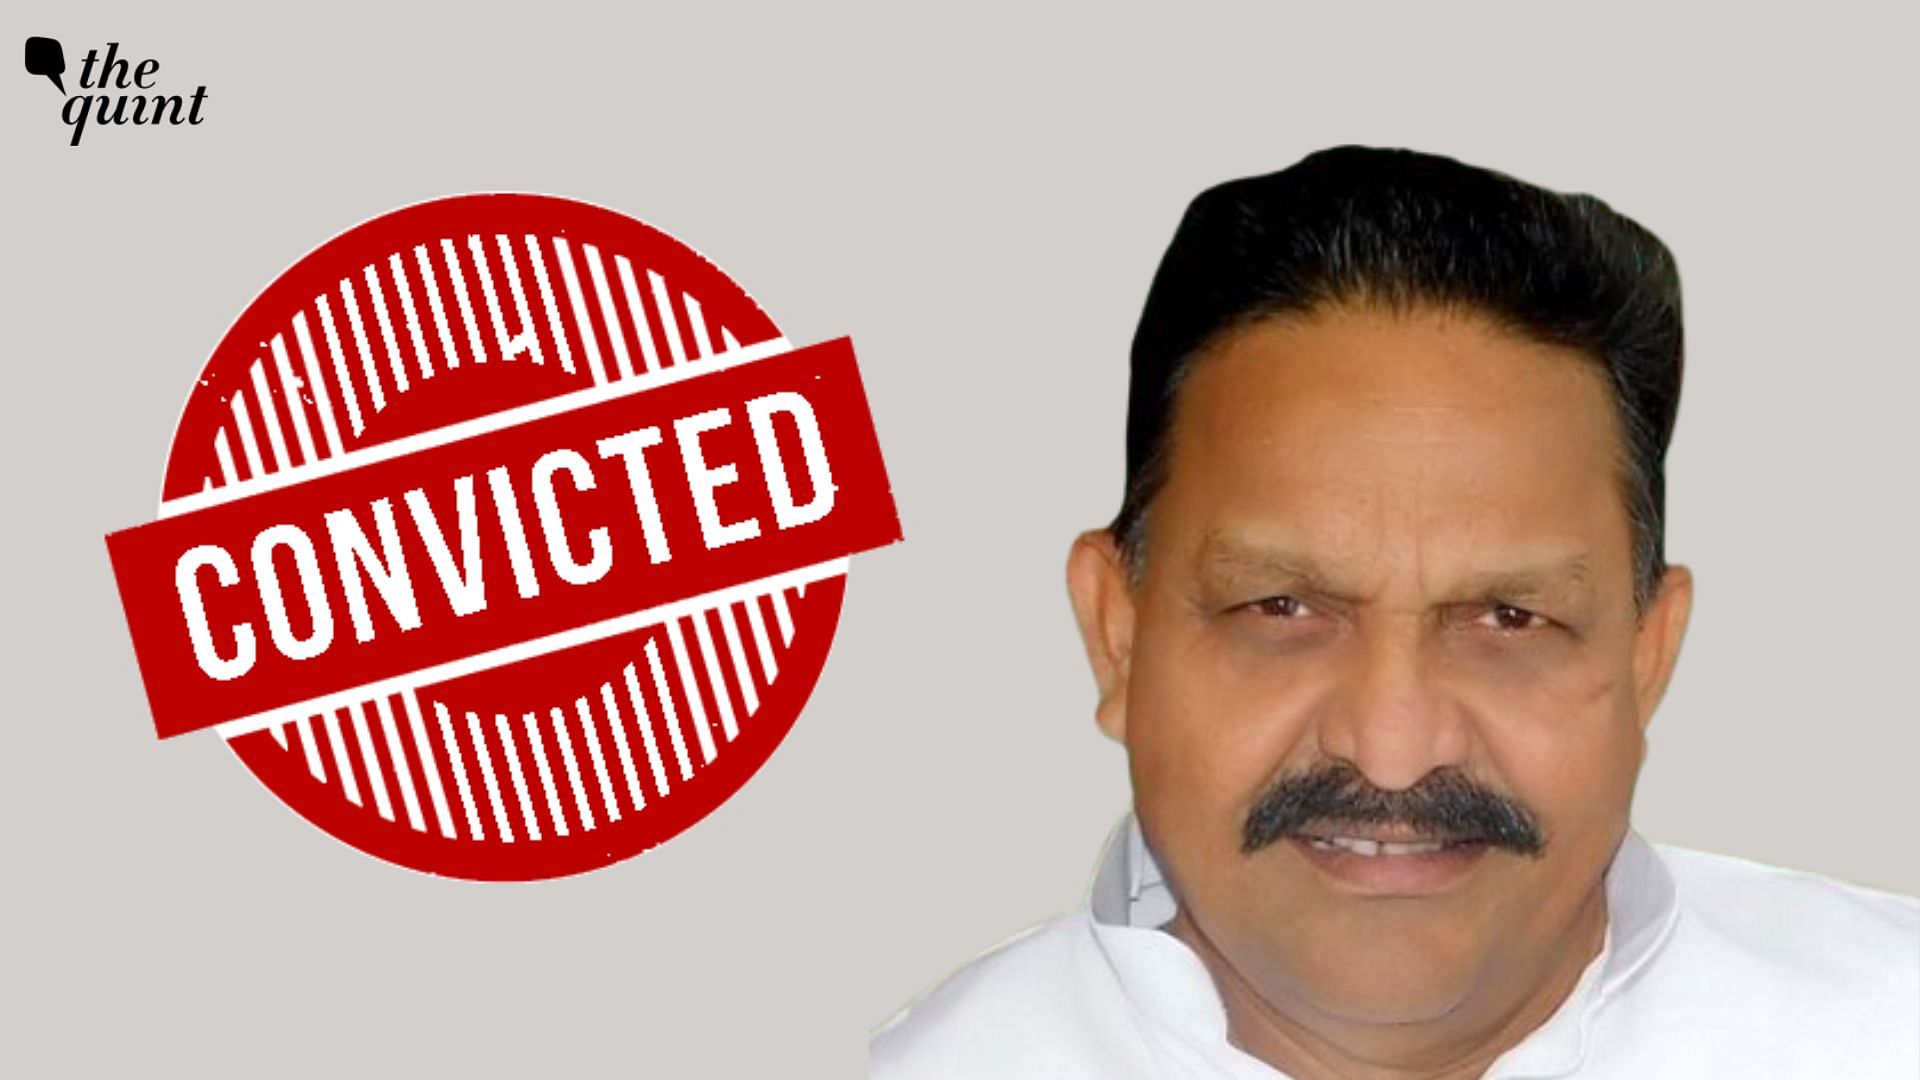 <div class="paragraphs"><p>A Ghazipur MP/MLA court on Saturday, 29 April, convicted Afzal Ansari, Member of Parliament (MP) from the Bahujan Samaj Party (BSP), in a case registered under the Gangster Act. He has now been sentenced to four years in prison and fined Rs 1 lakh.</p></div>